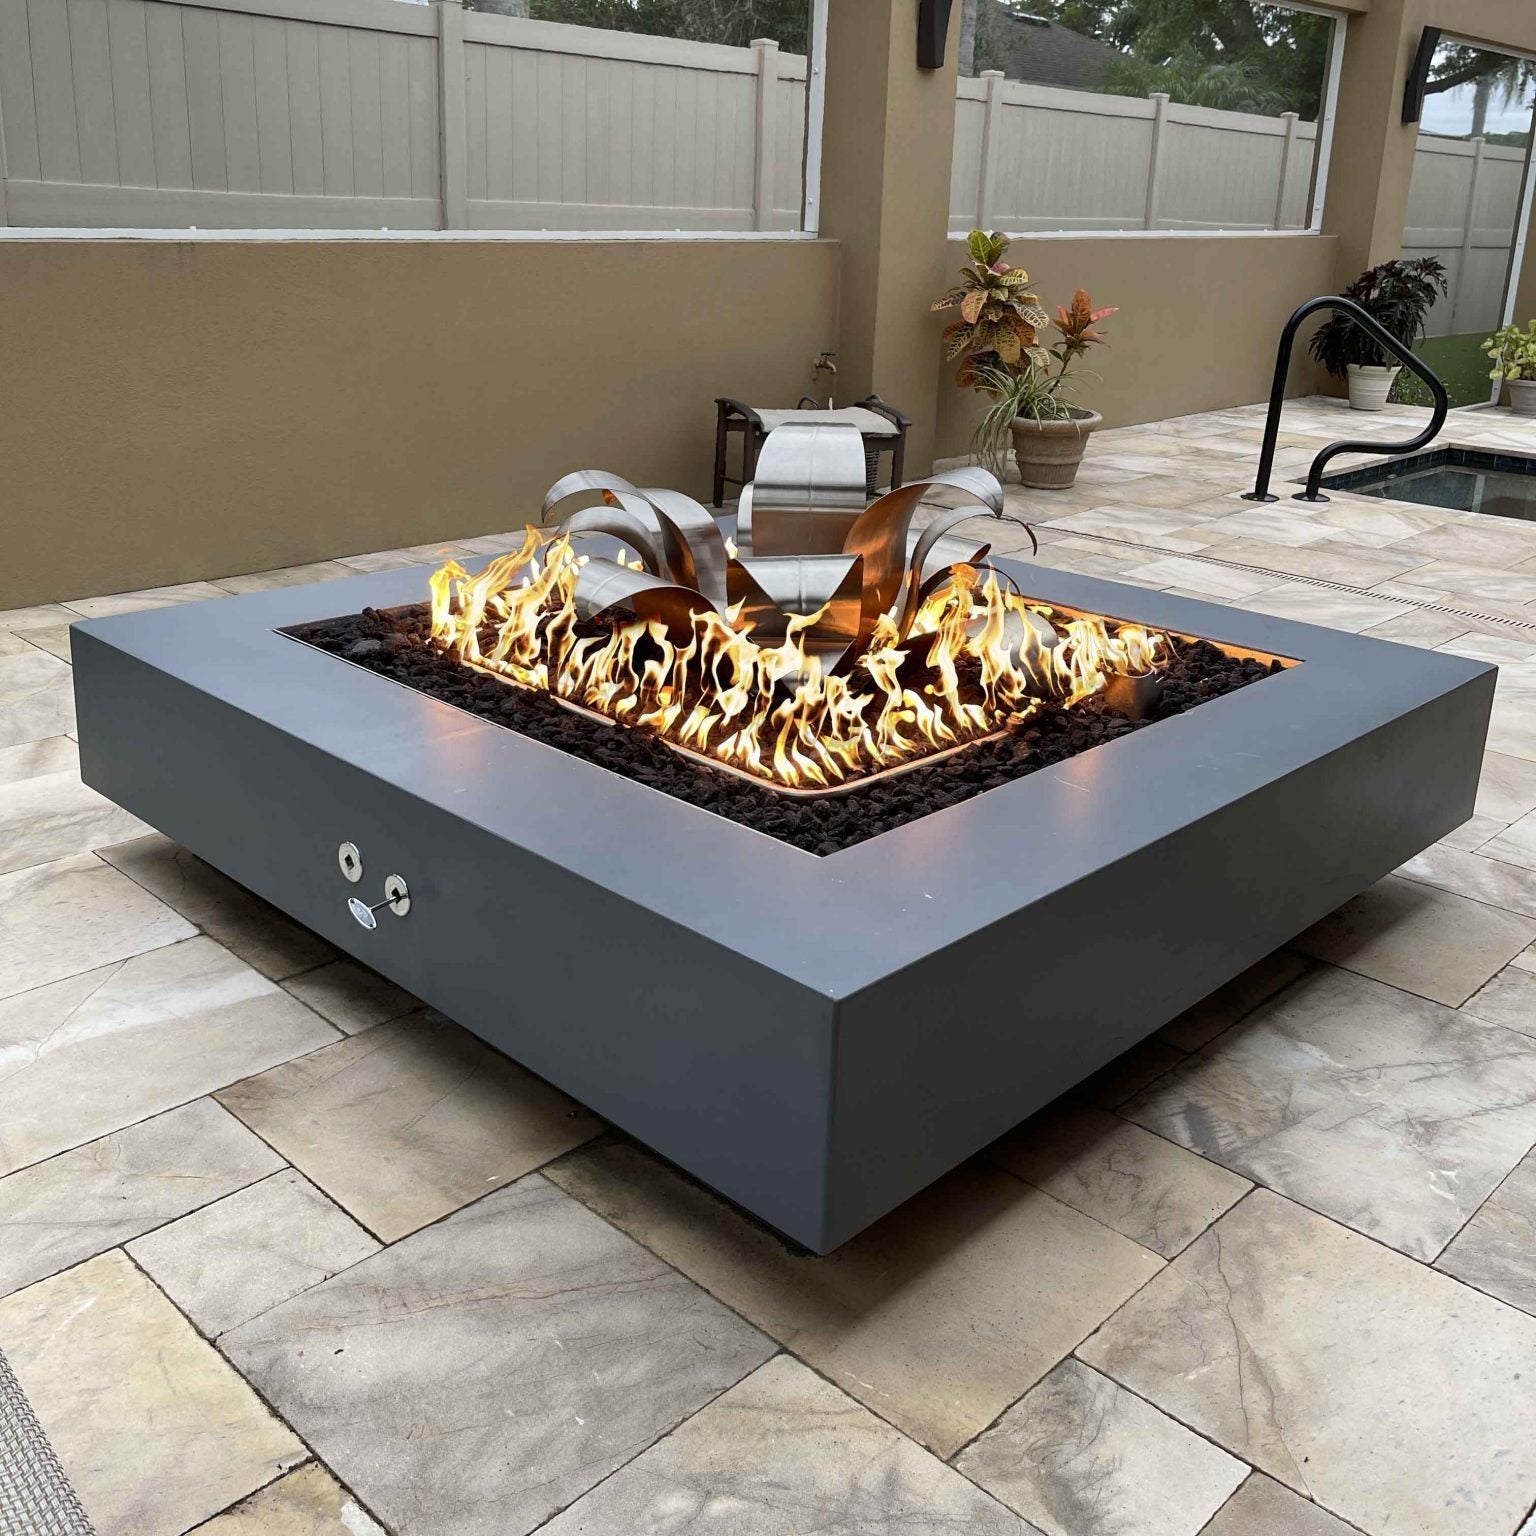 The Outdoor Plus Cabo Square Fire Pit in Powder Coated Steel Steel + Free Cover